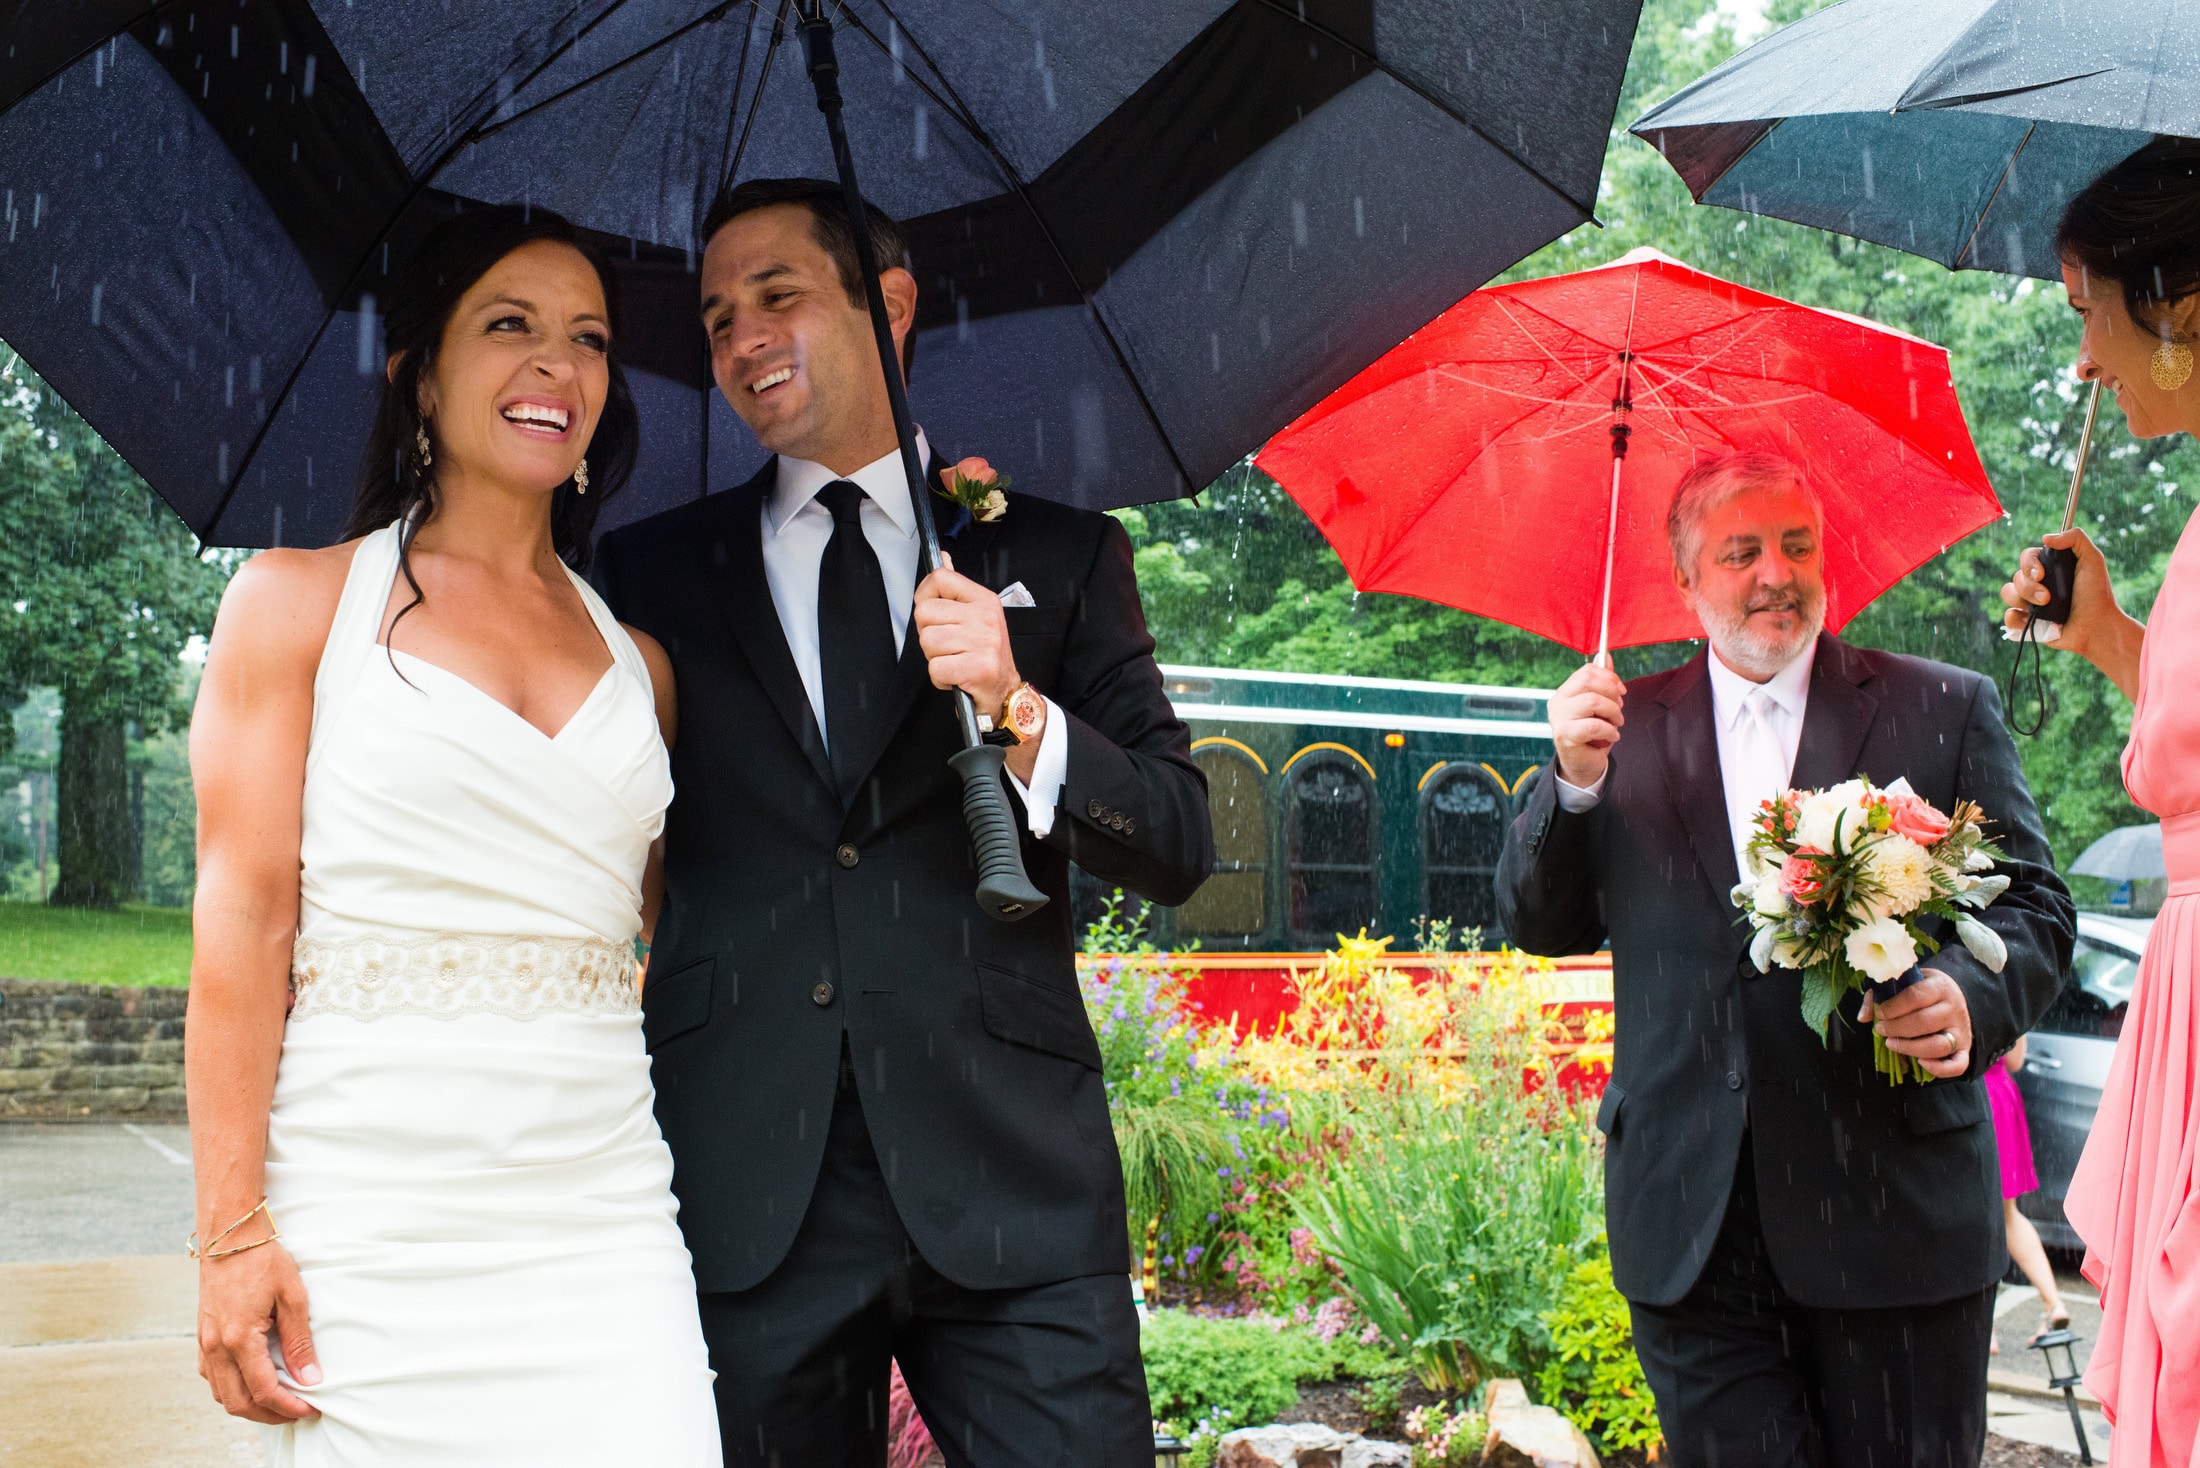 A bride and groom stand smiling together beneath a large golf umbrella as her father and sister stand beneath their own umbrellas during a rain storm.